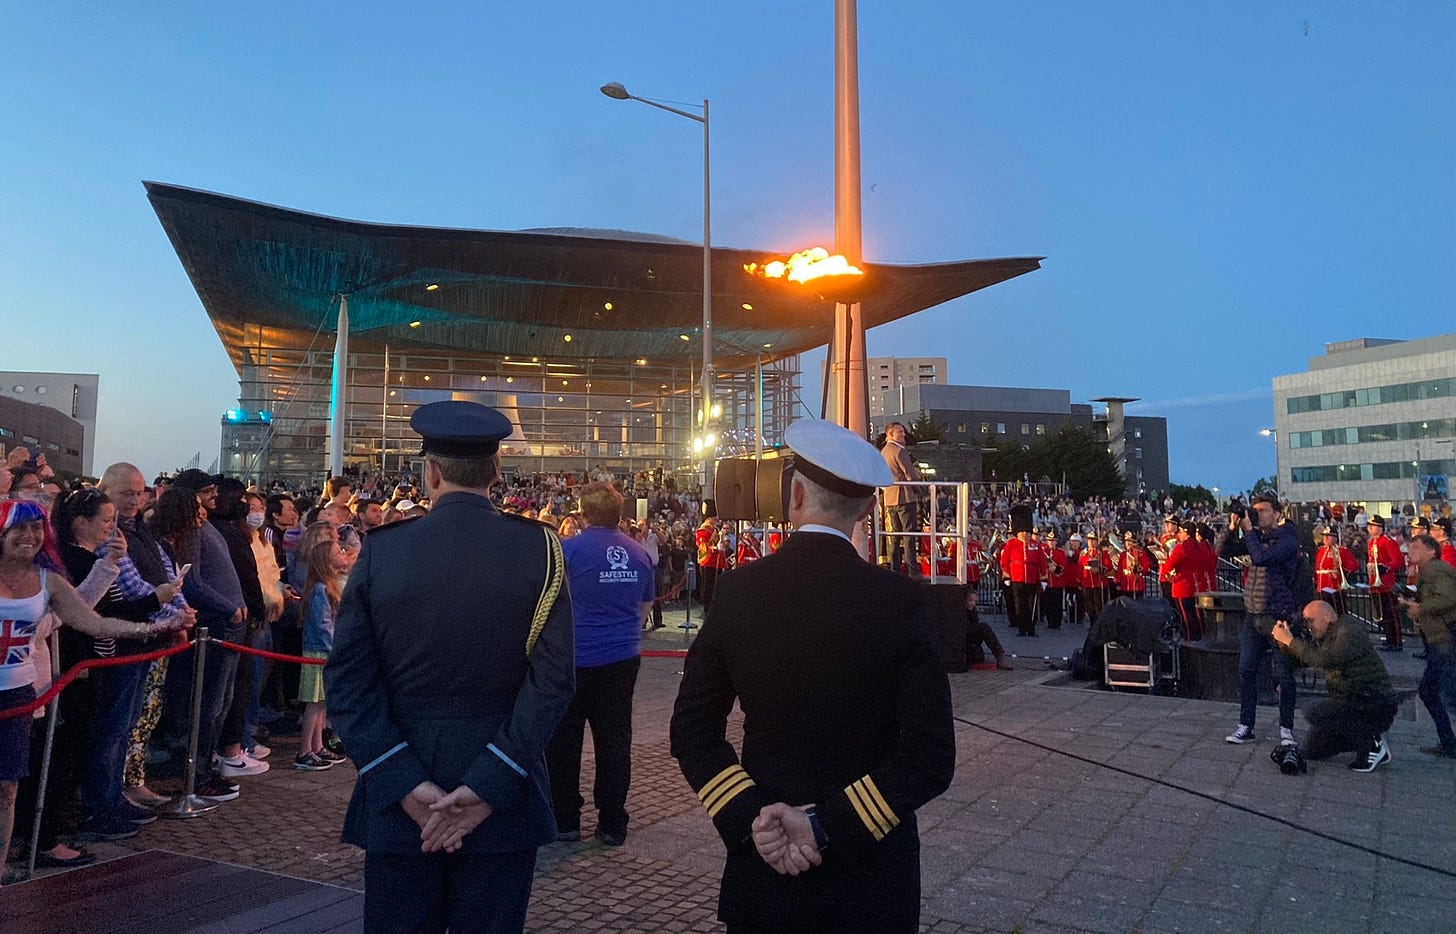 Beacon lit outside the Senedd (the Welsh parliament) at Cardiff Bay in Cardiff, Wales to mark Queen Elizabeth II’s platinum jubilee. About 4,000 such beacons were lit across the UK, British territories and 54 Commonwealth capitals across the world on June 2, 2022. (Image: Nachiket Deuskar/Untwined)